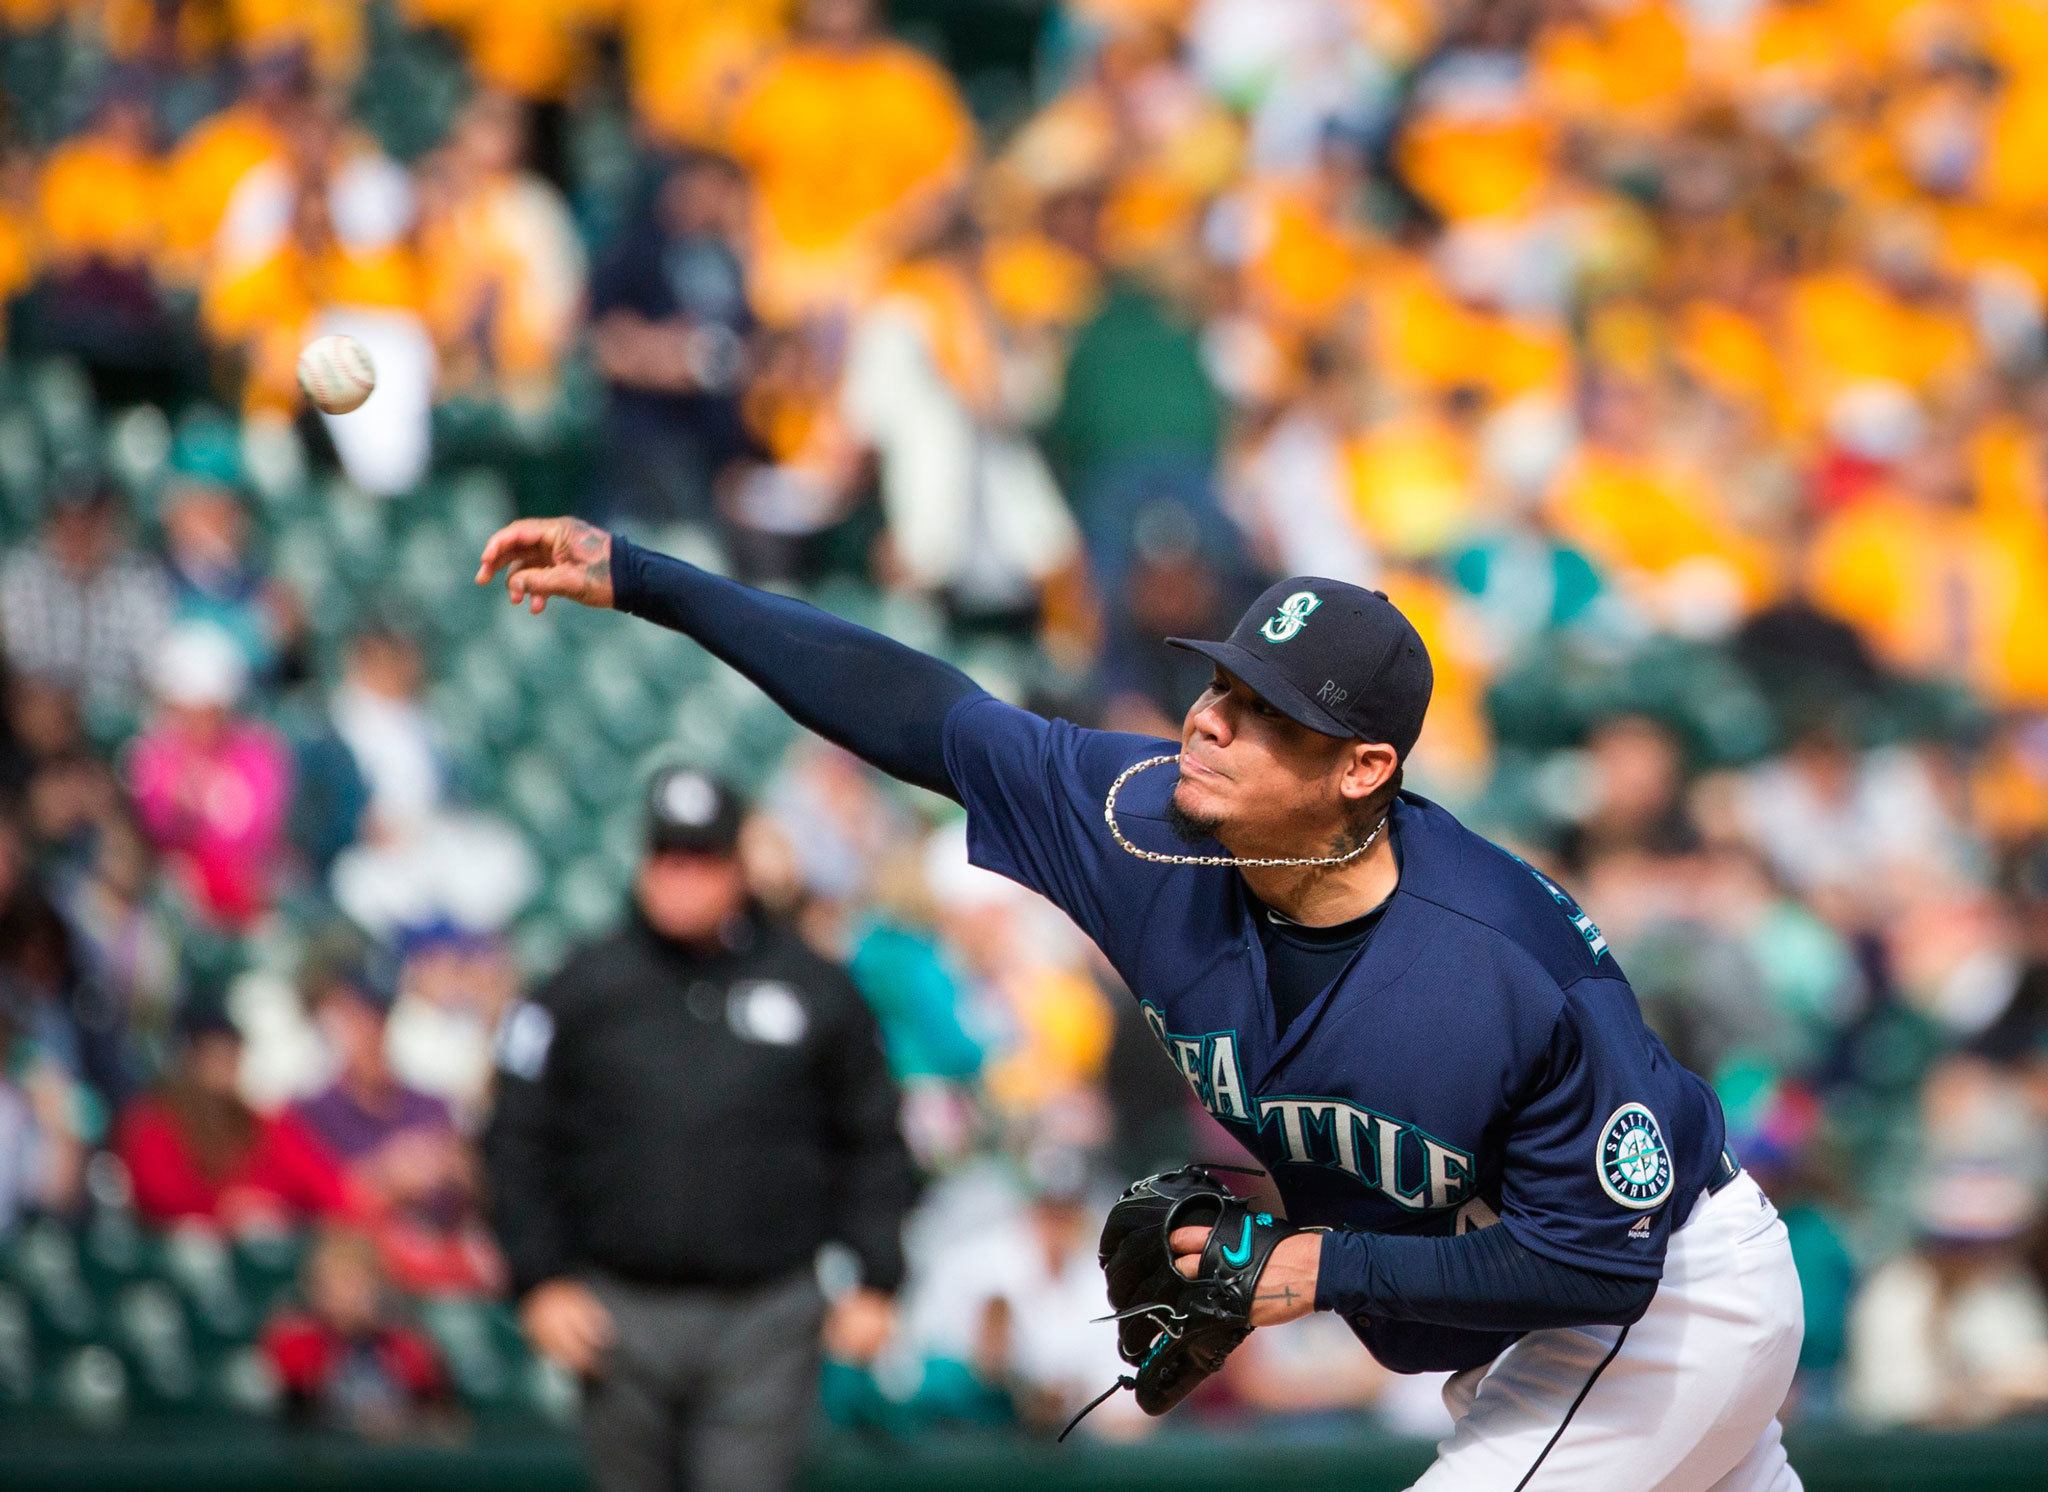 (Lindsey Wasson | Seattle Times) Seattle’s Felix Hernandez, seen here throwing a pitch during the final game of the 2016 season against Oakland in Seattle, will be one of the many pitchers and catchers who’ll report to spring training today in Arizona.